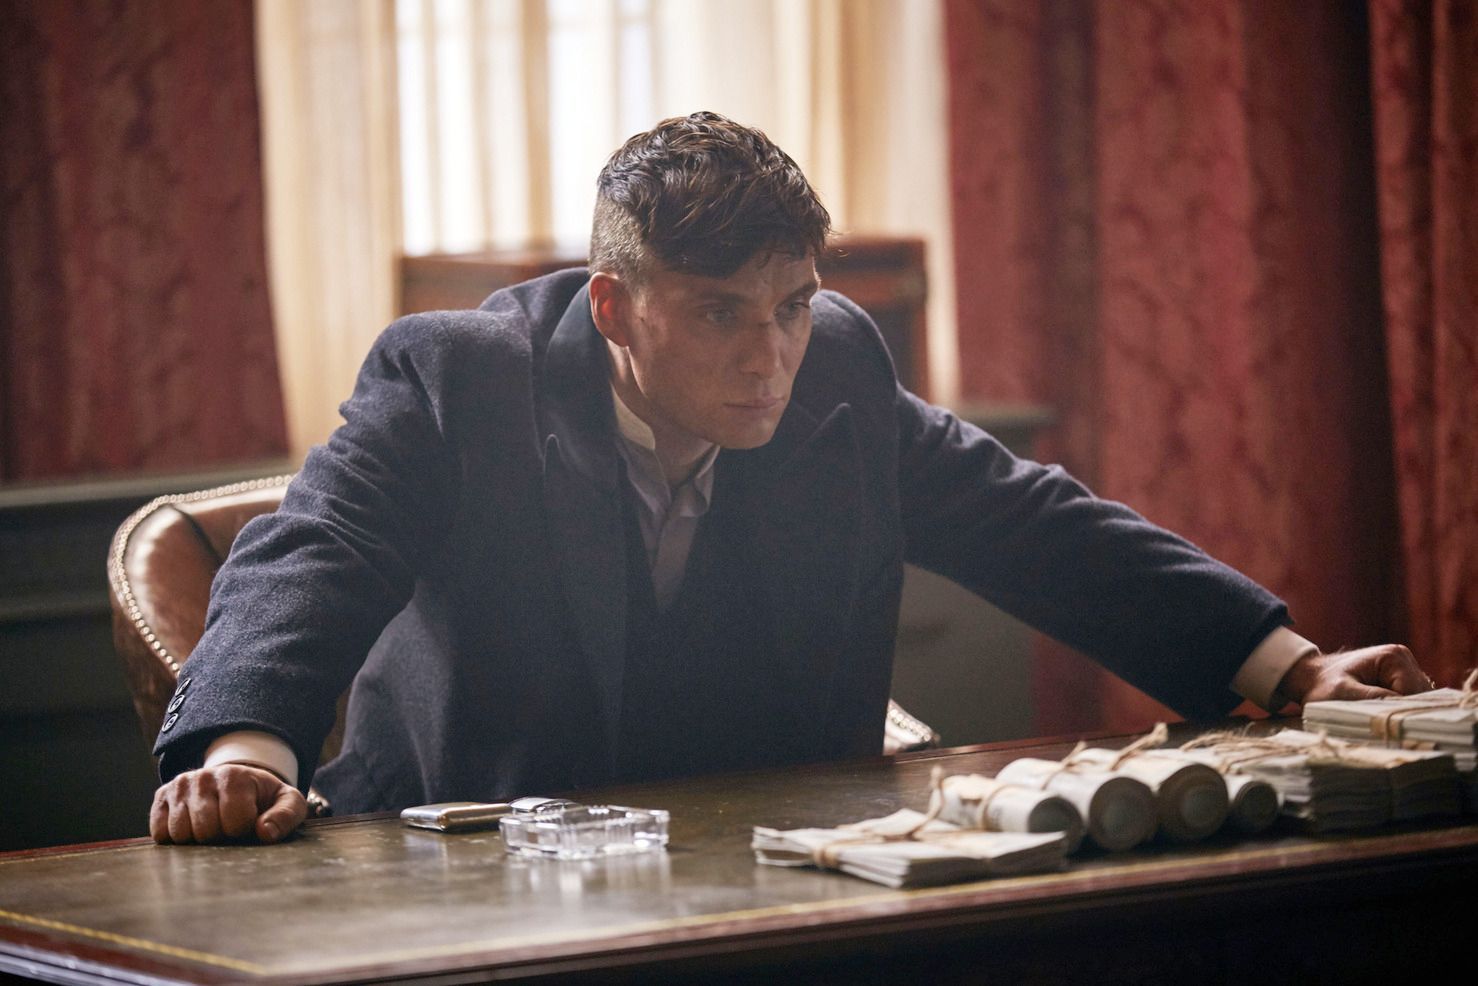 Cillian Murphy confirms Peaky Blinders fan theory about Thomas Shelby